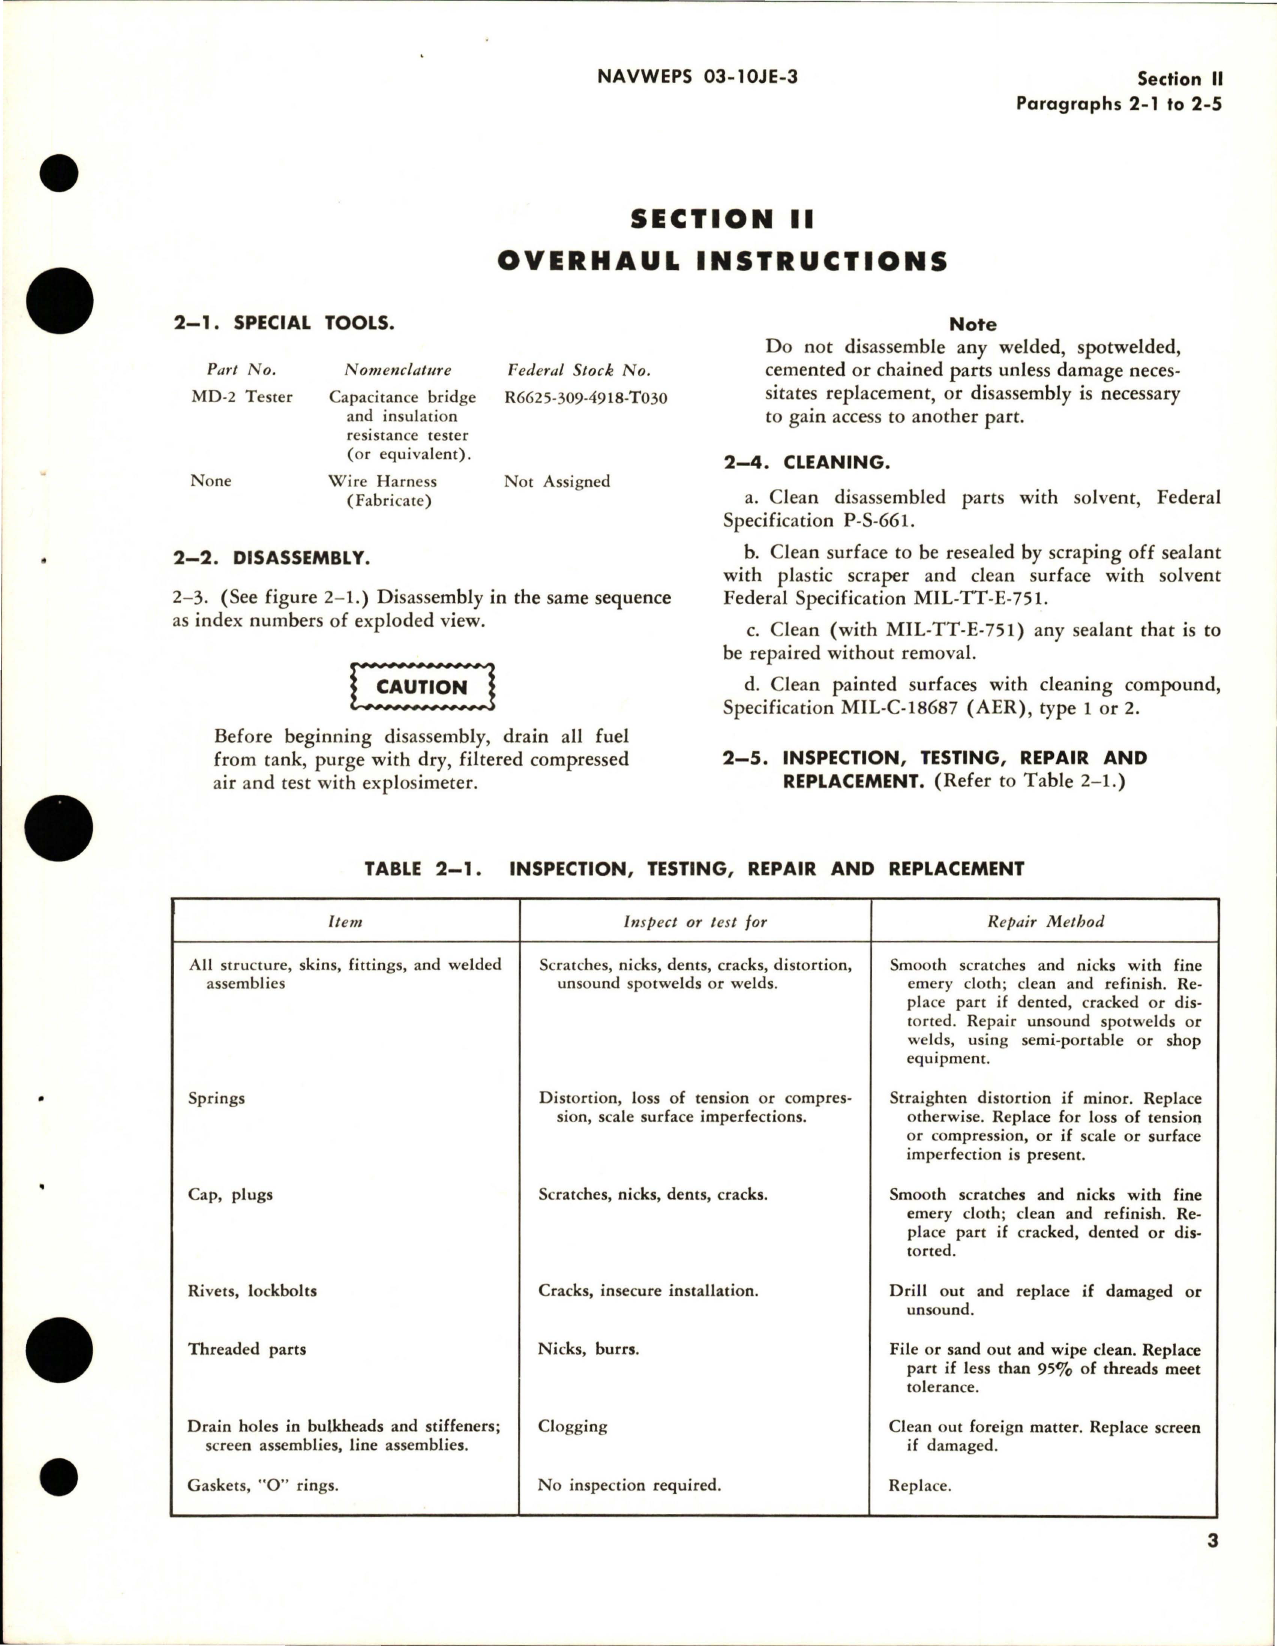 Sample page 7 from AirCorps Library document: Overhaul Instructions for 400 Gallon Fuel Tank - Parts 5556400 and 5556400-501